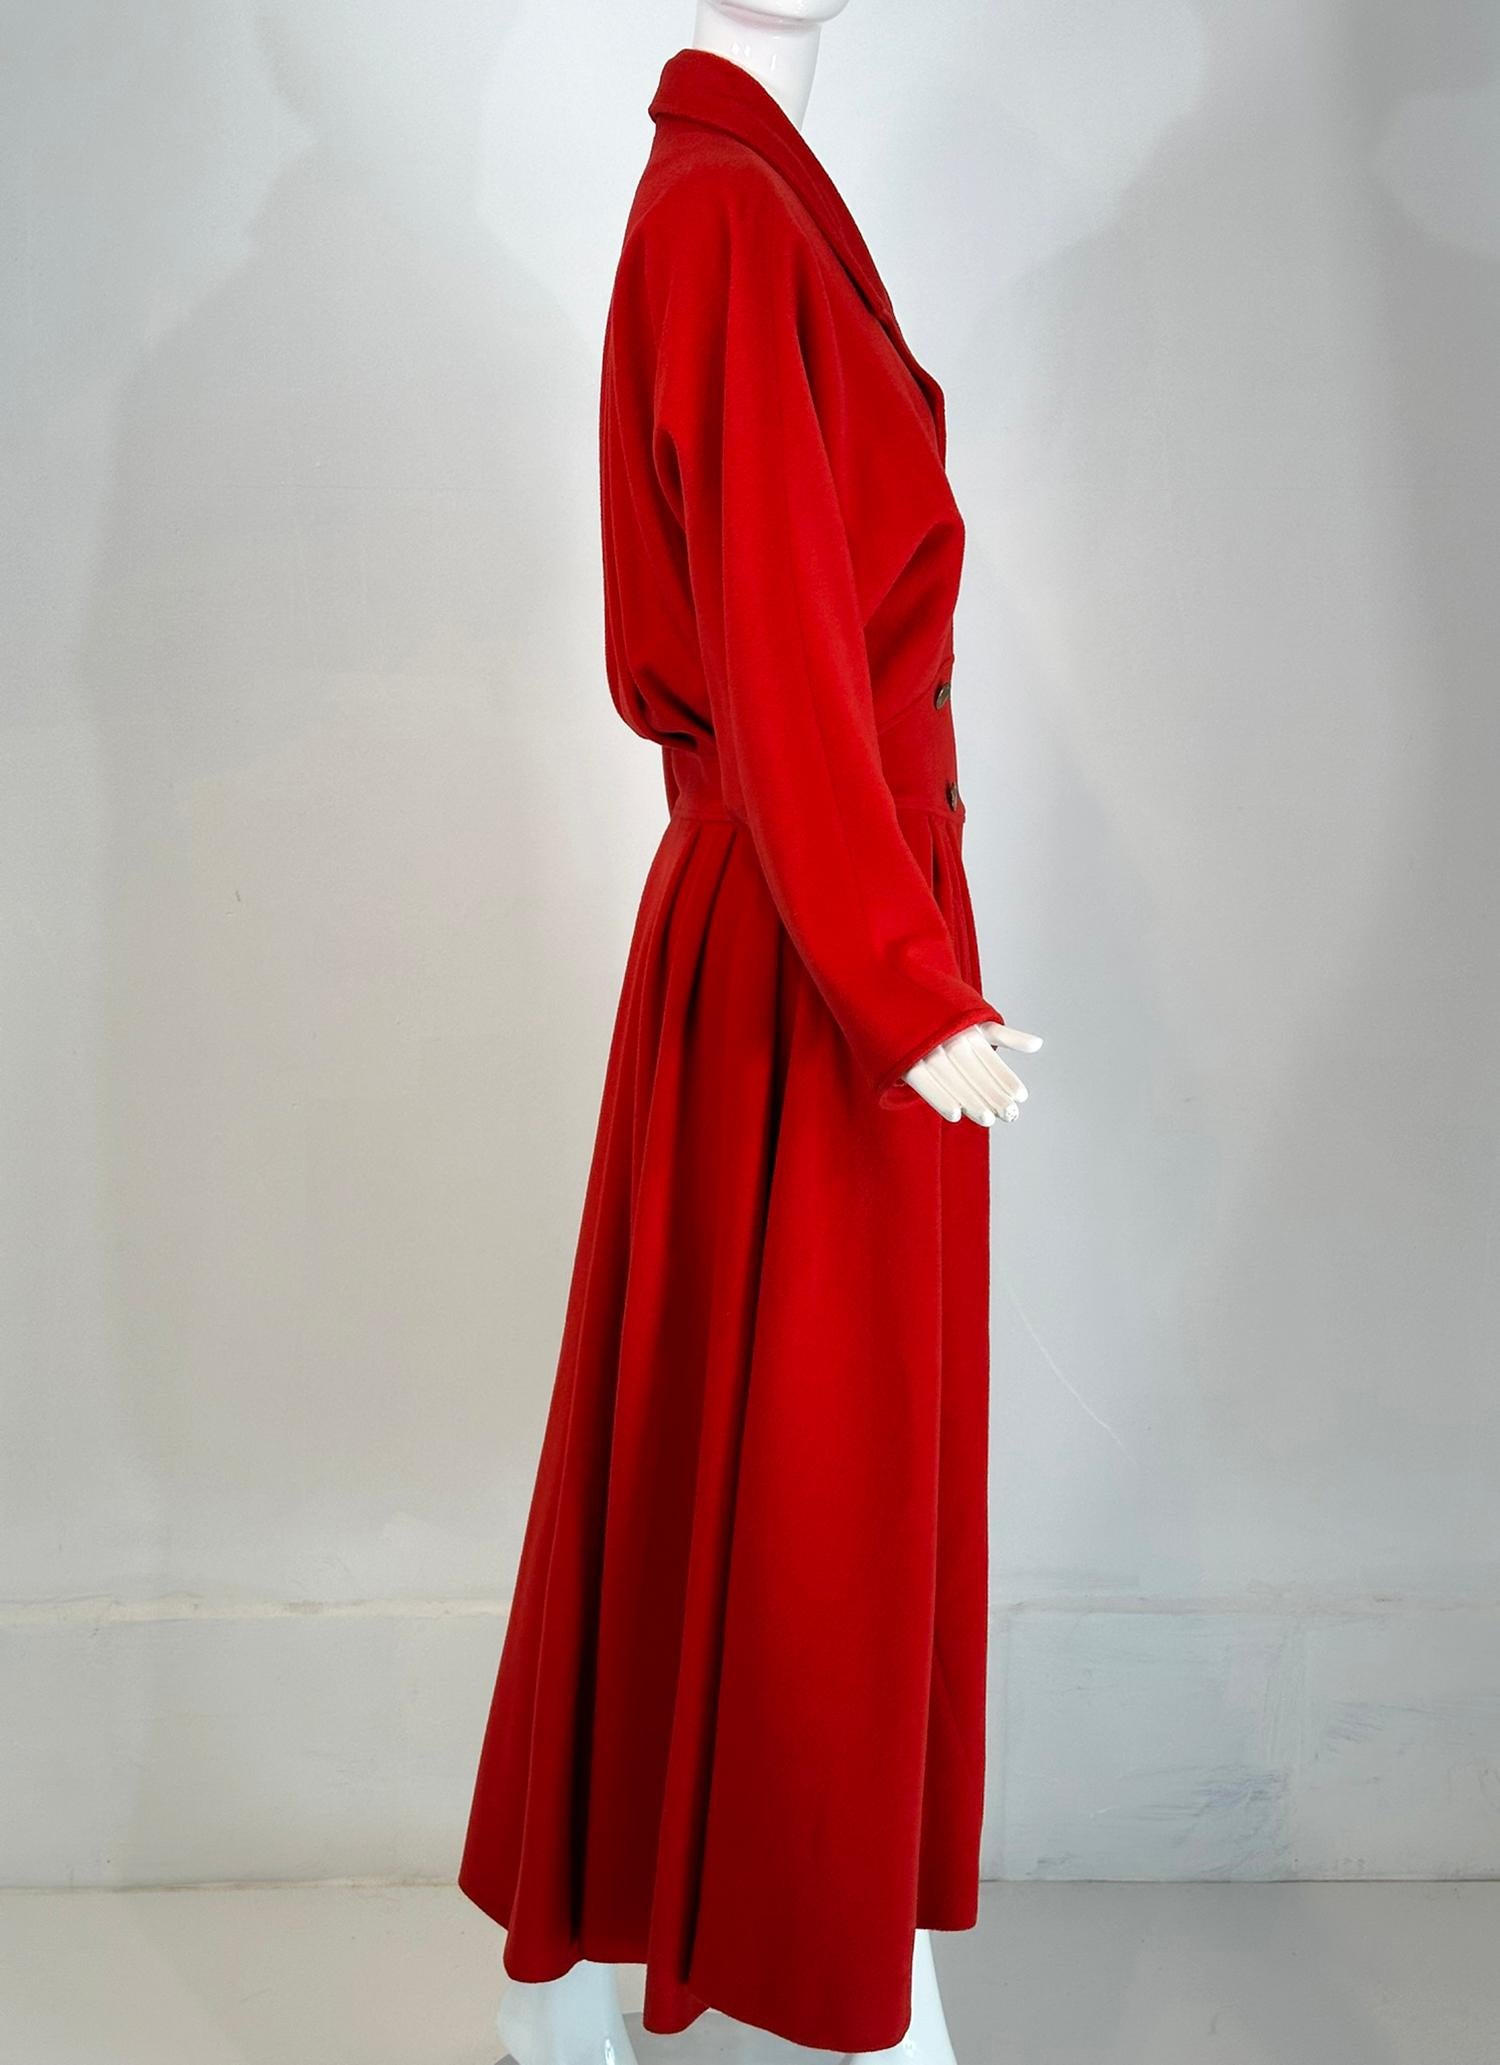 Karl Lagerfeld Dramatic Red Wool Dolman Sleeve Semi Full Skirt Coat 10 1980s In Good Condition For Sale In West Palm Beach, FL